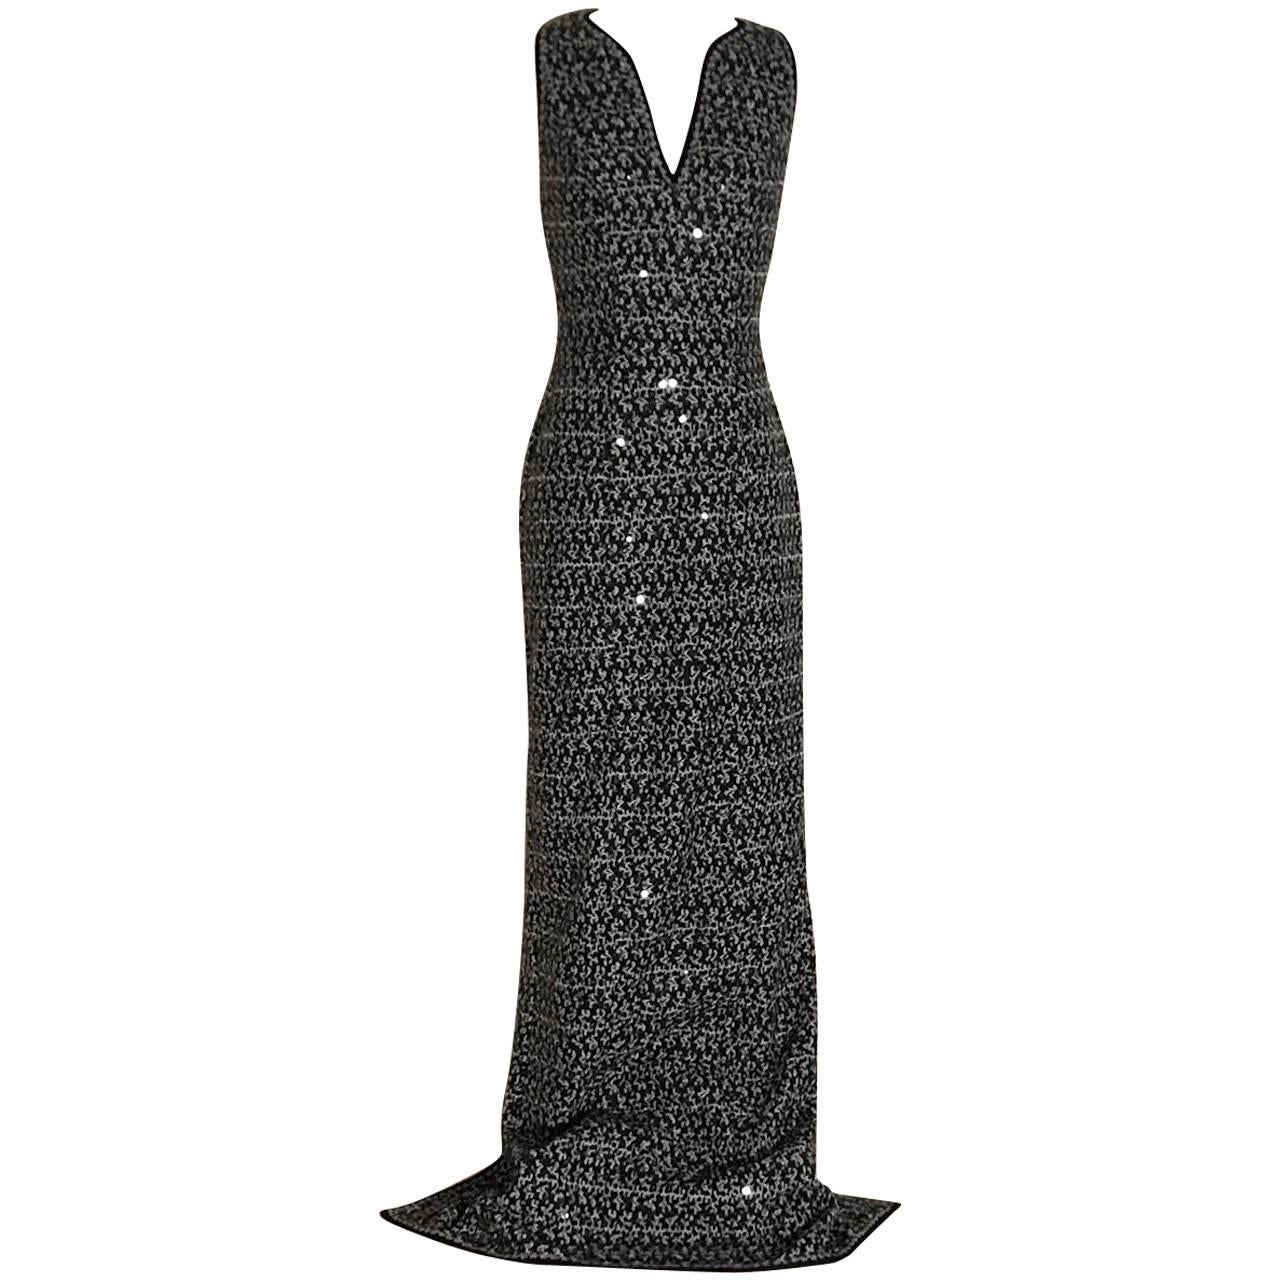 New Missoni Black and White Knit Sequin Accent Long Maxi Dress Gown with Tags